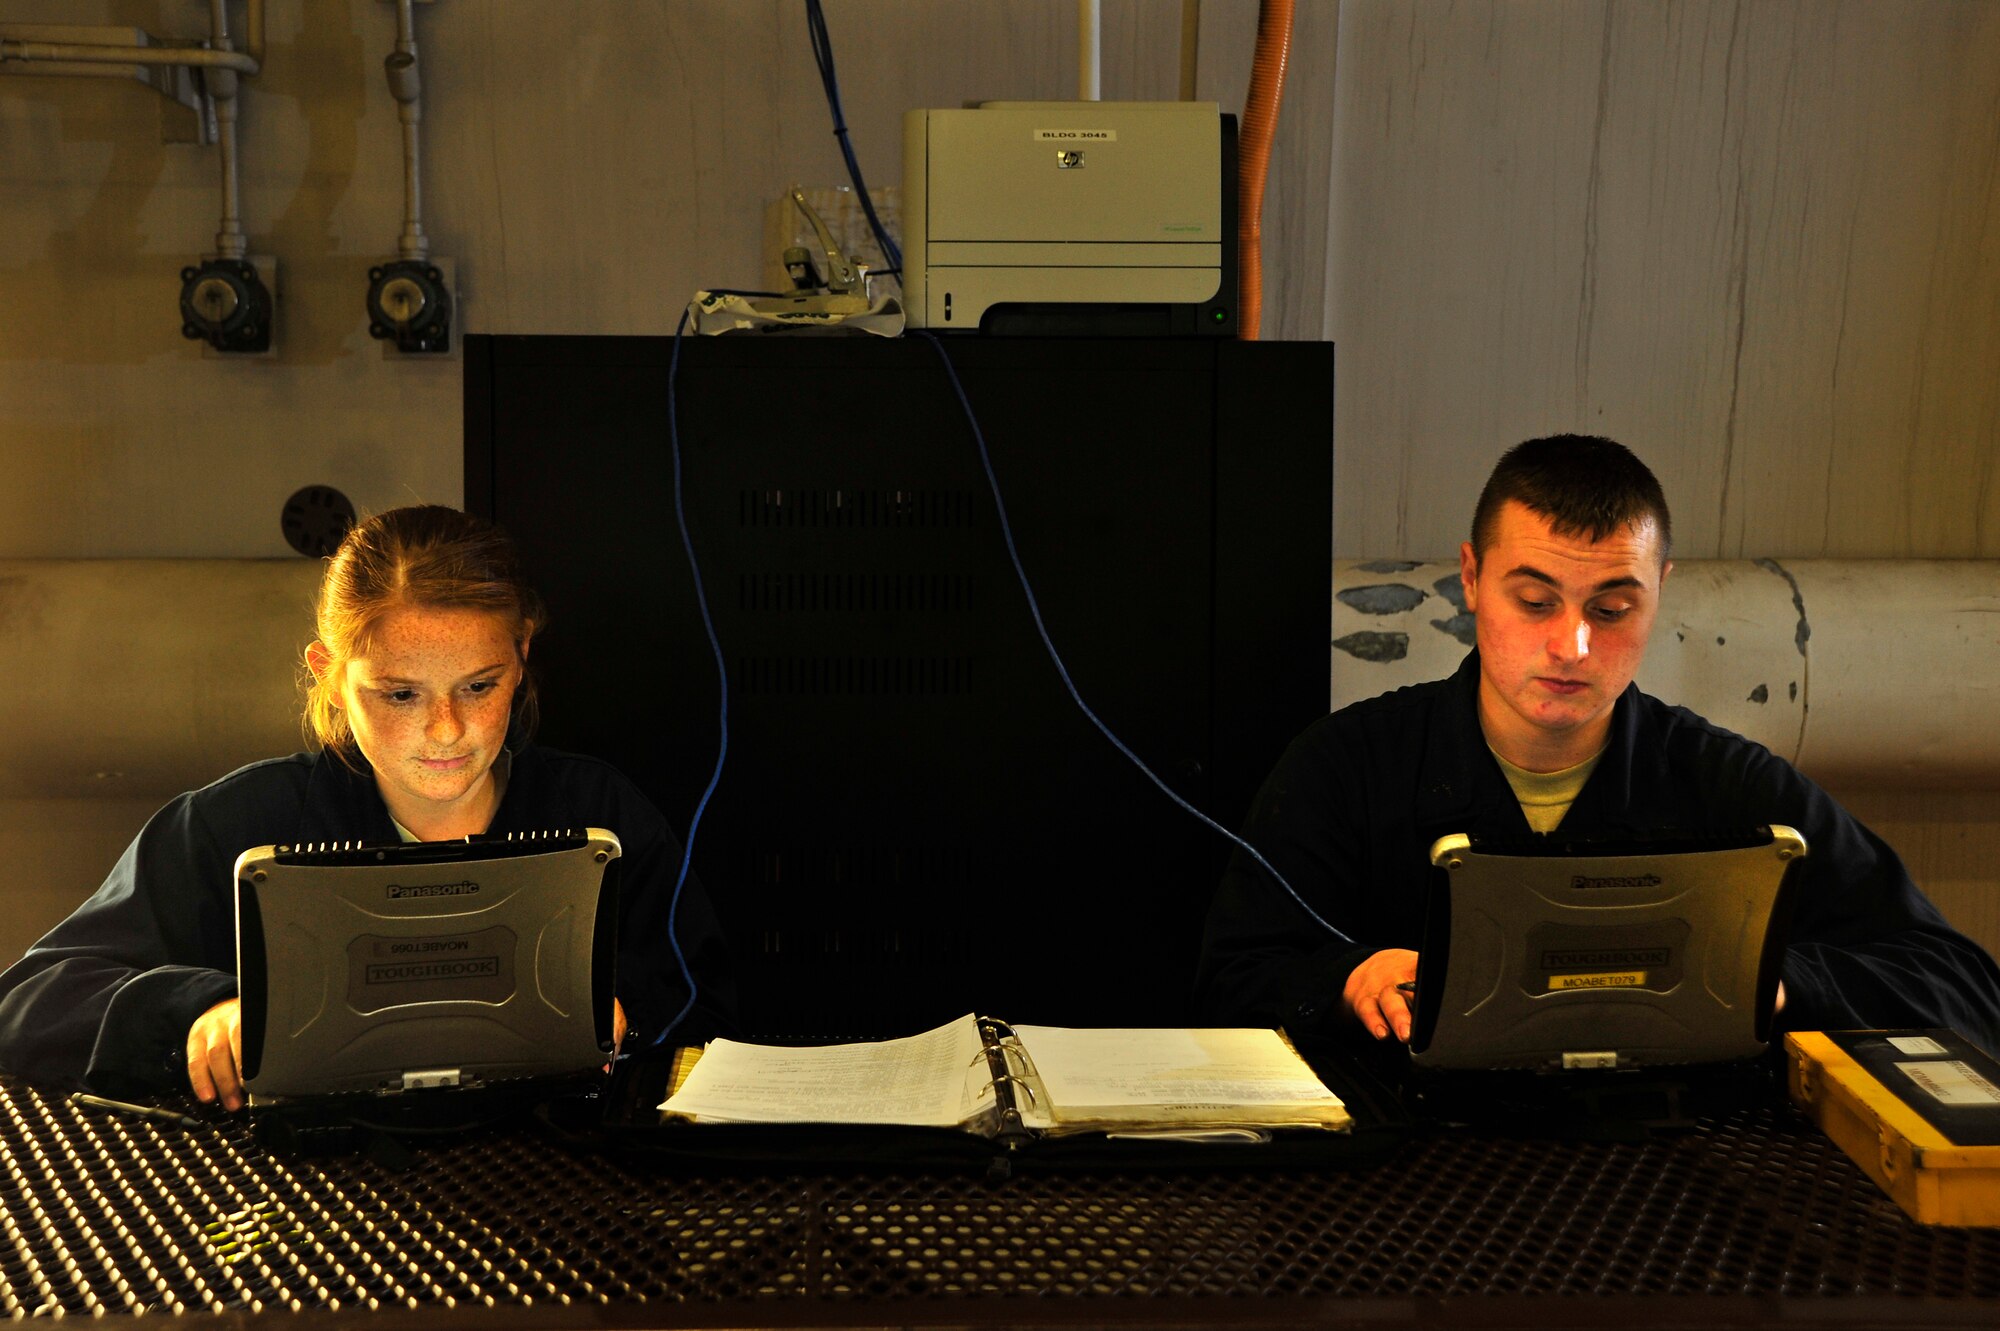 MISAWA AIR BASE, Japan - U.S. Air Force Staff Sgt. Melody Weisbaum, left, and Airman 1st Class Robert Wickman, 14th Aircraft Maintenance Unit, input maintenance reports to the integrated maintenance data system from a hardened aircraft shelter during an operational readiness exercise here Nov. 5. The 35th Maintenance Squadron is testing the new internet capability in its HAS’s for the first time as part of the exercise. (U.S. Air Force photo/Staff Sgt. Nathan Lipscomb)      